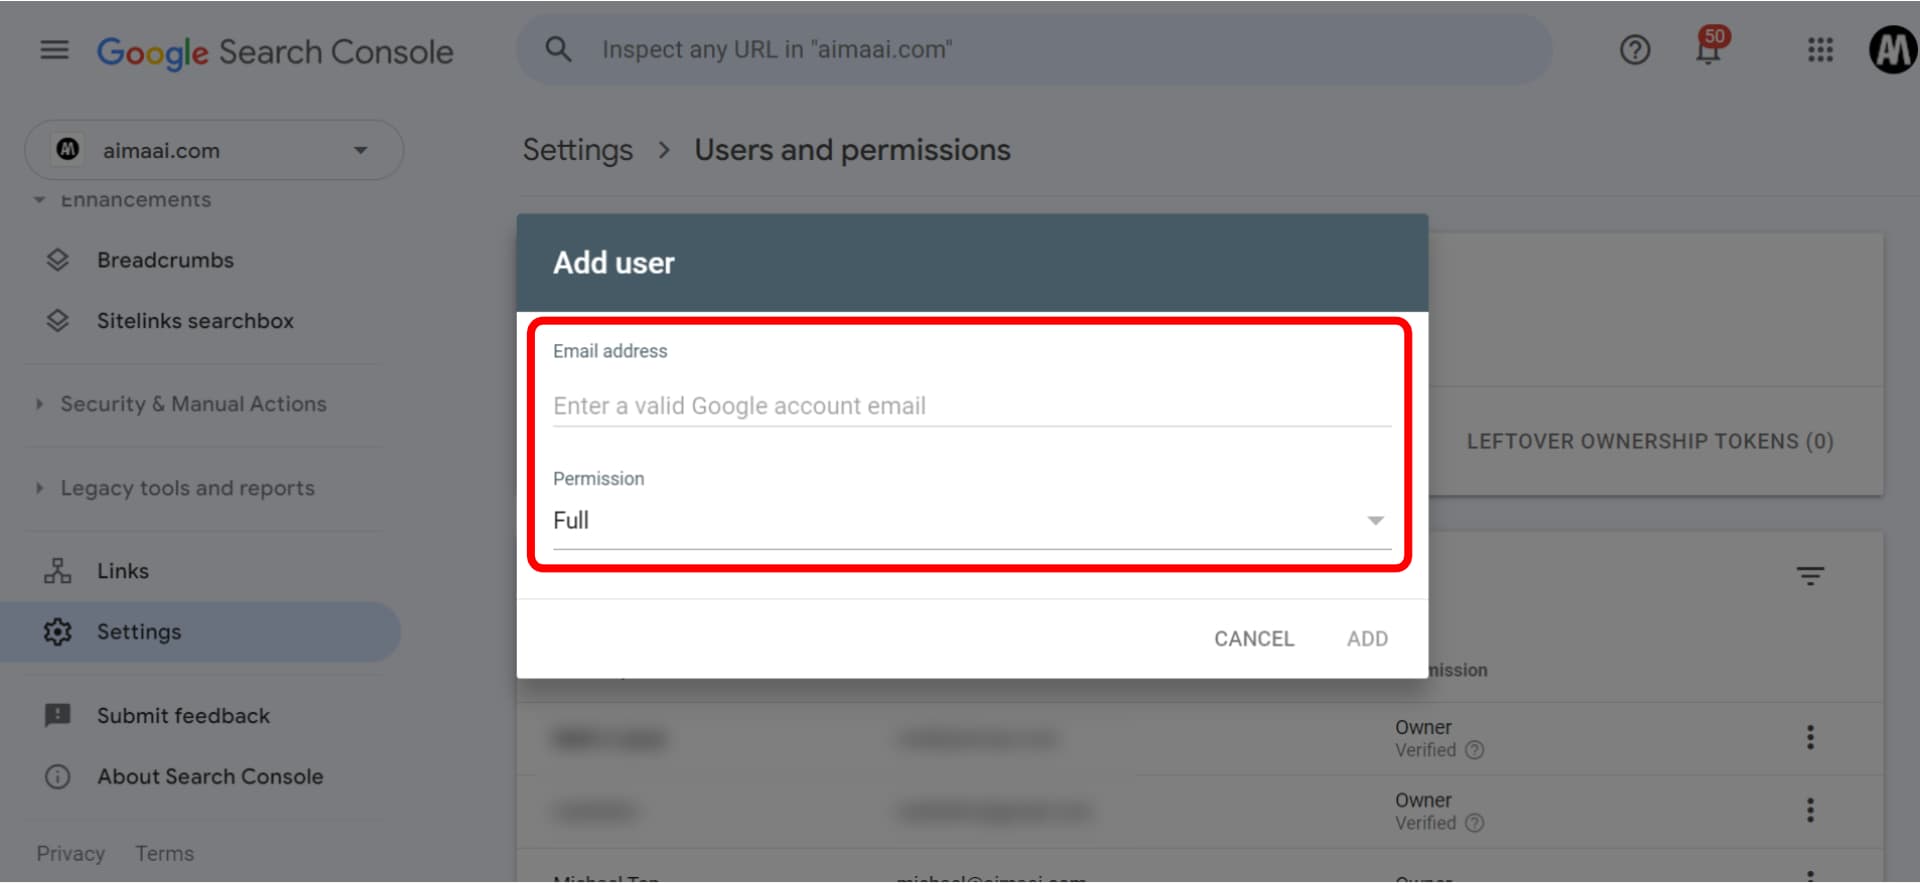 Screenshot of a user interface for adding a new user with full permission in a google service.